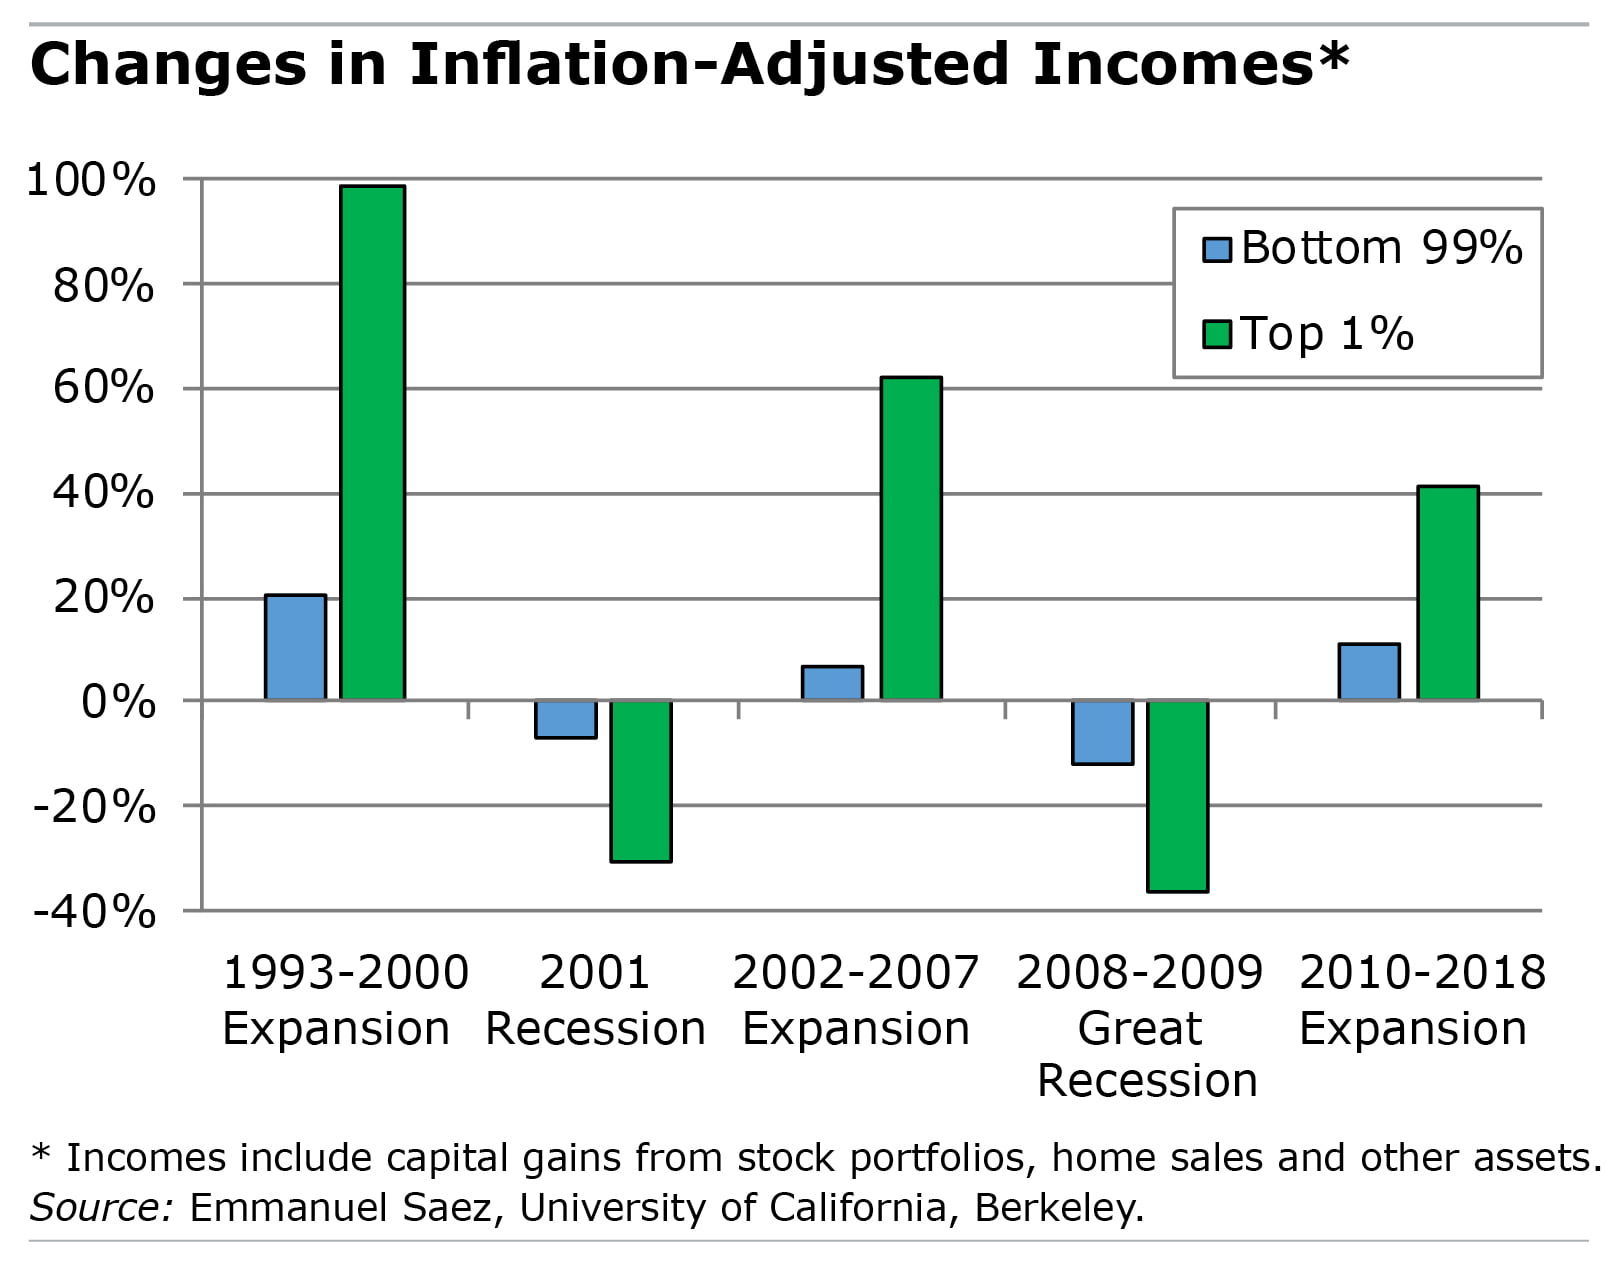 anges in Inflation-Adjusted Incomes